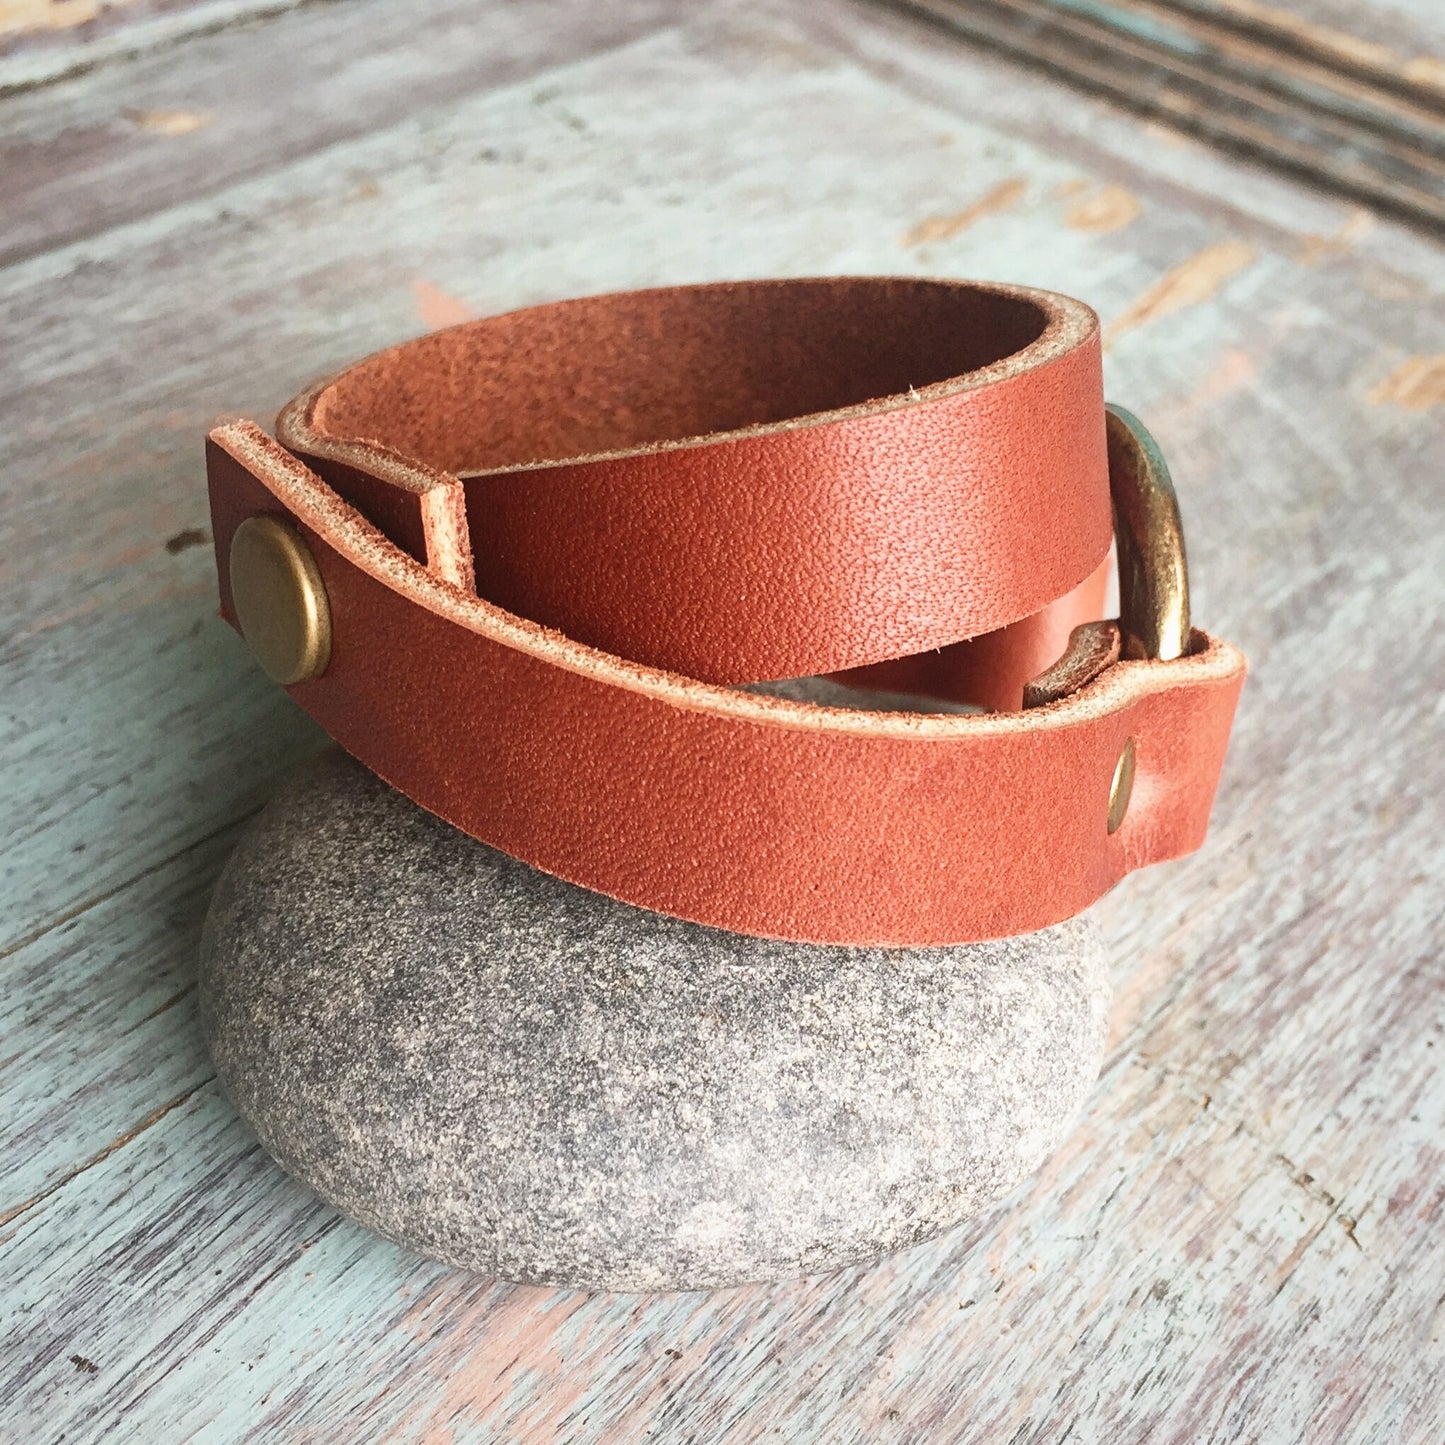 Everyday leather wrap bracelet, Womens leather cuff, Leather wrap bracelet for women, Bracelet for women, Leather jewelry, Anniversary gift